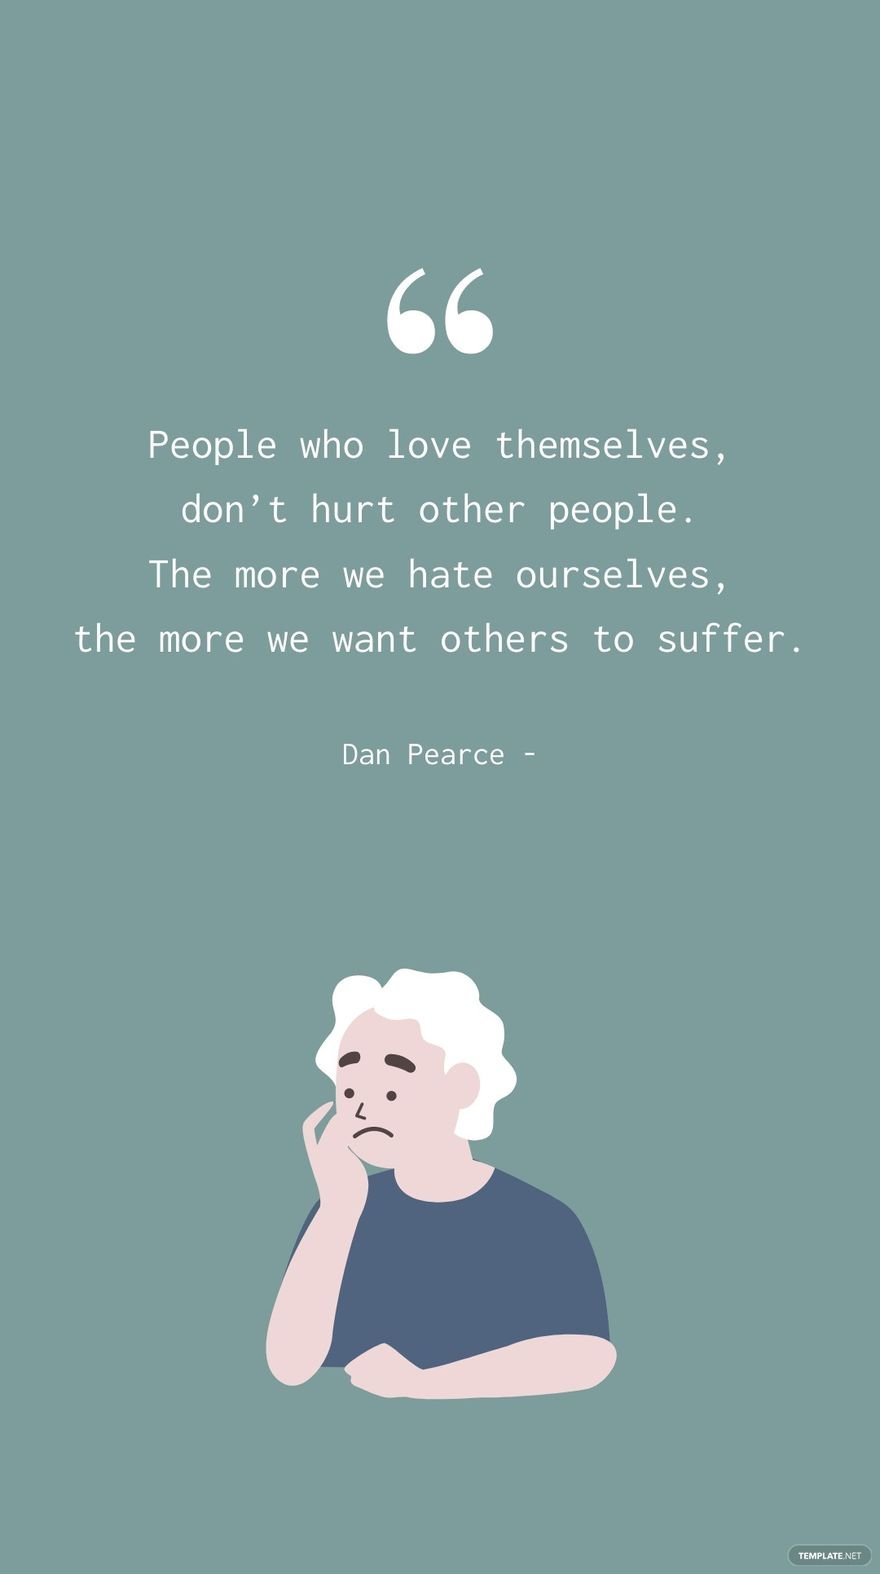 Dan Pearce - People who love themselves, don’t hurt other people. The more we hate ourselves, the more we want others to suffer.